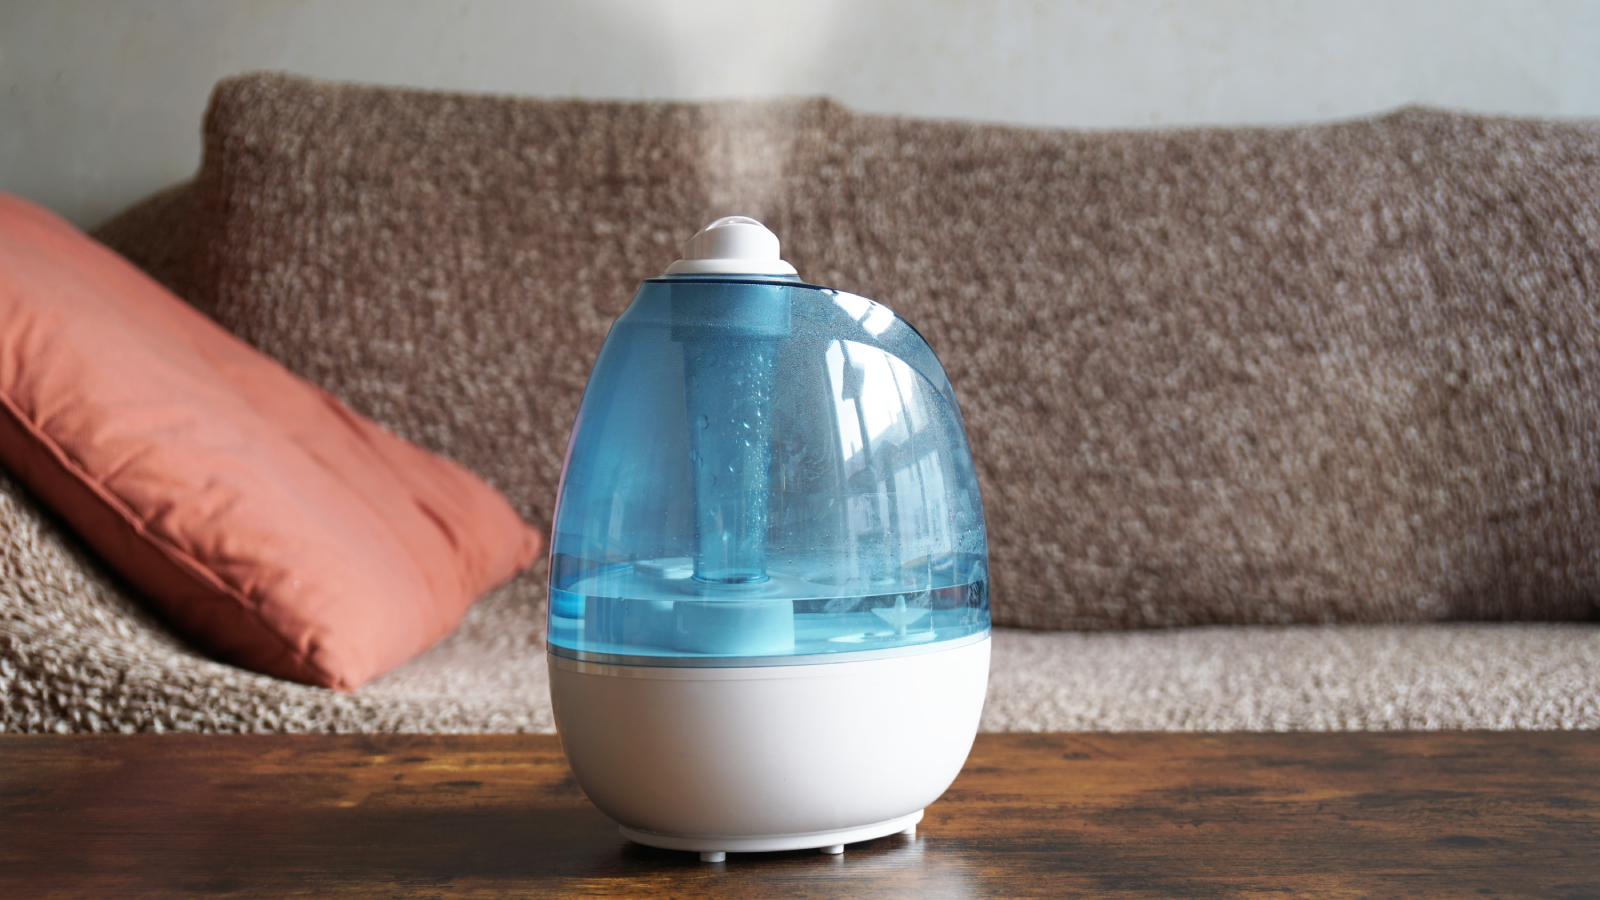 which humidifiers